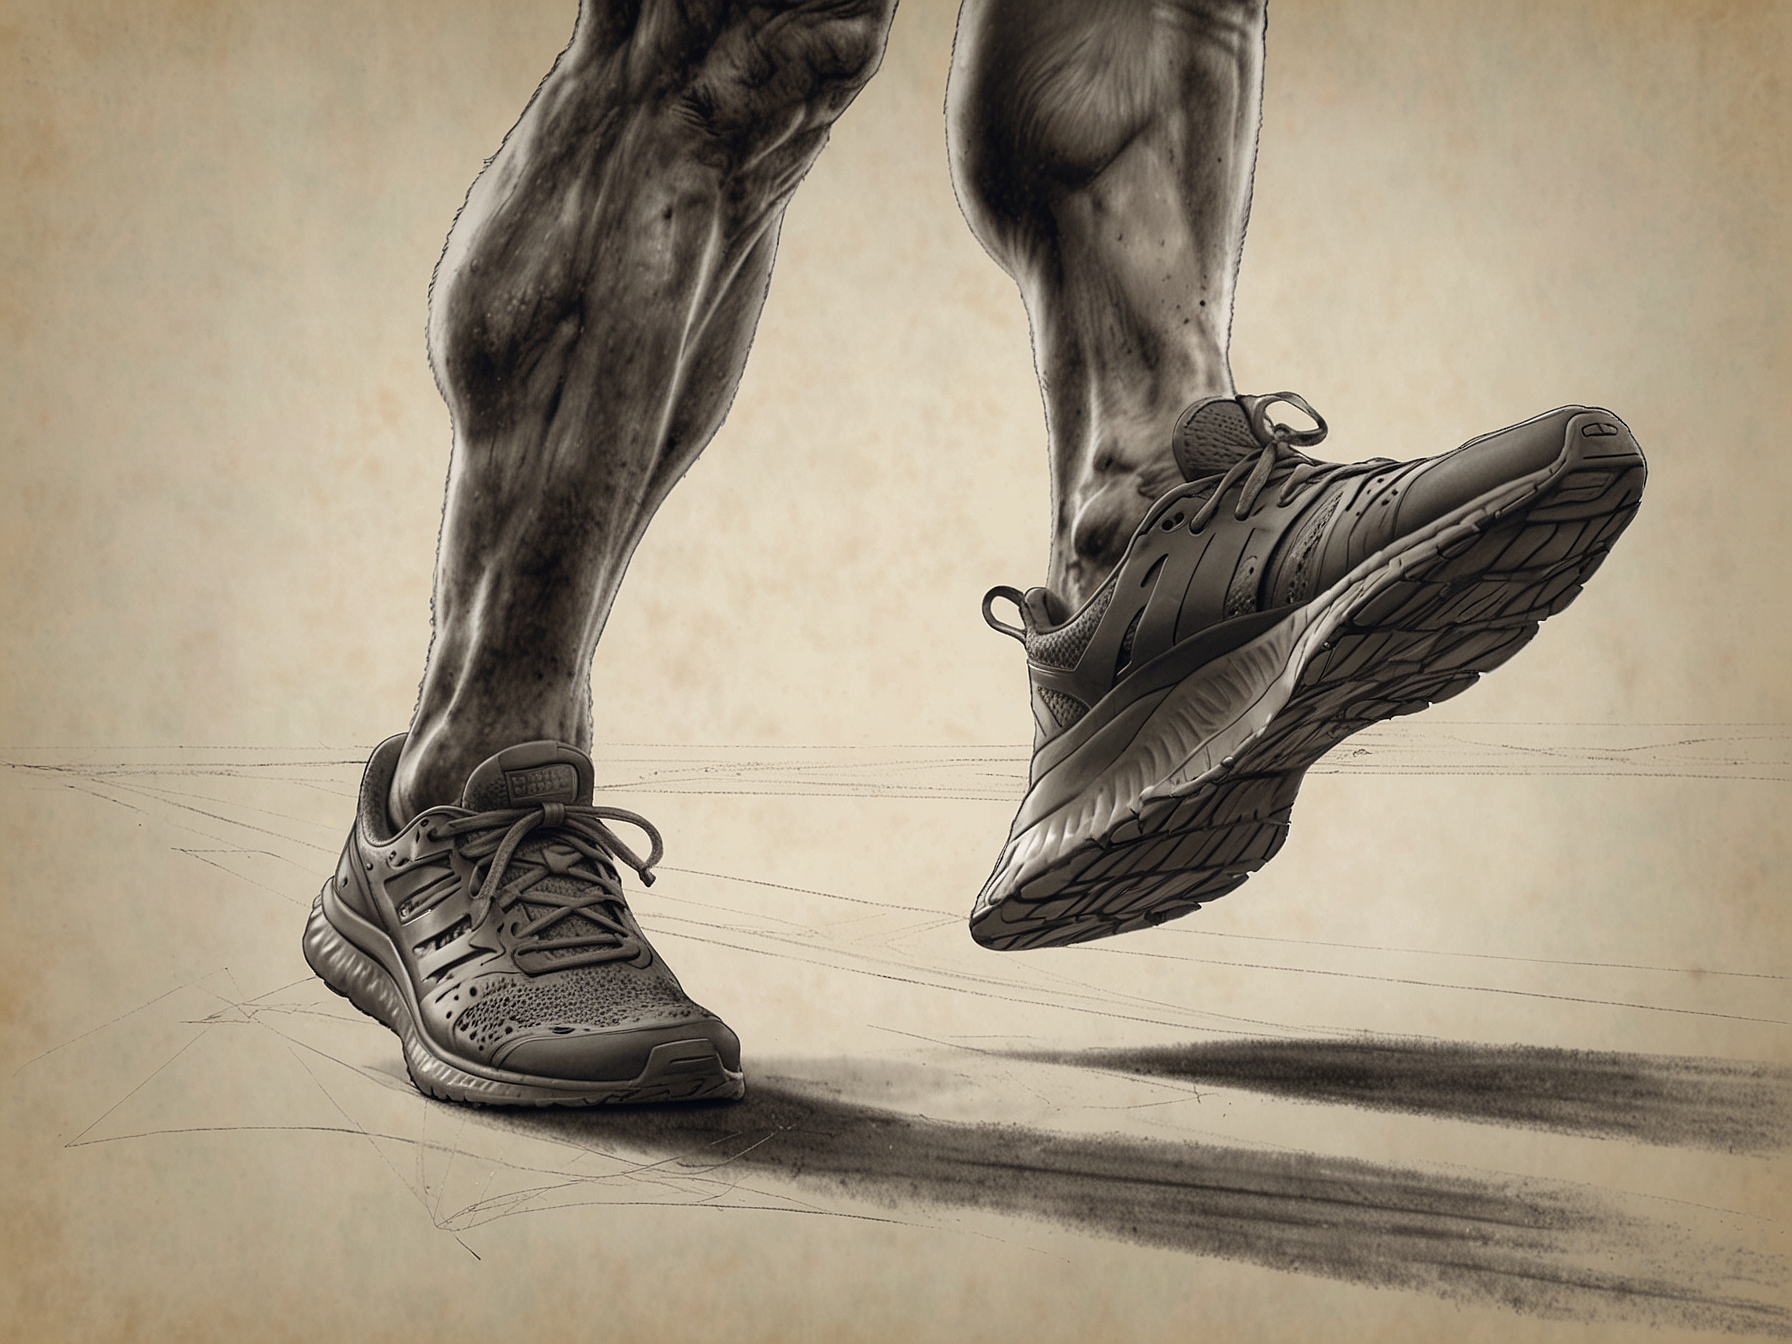 A close-up image of feet mid-stride, demonstrating the concept of optimal stride length with feet landing directly under the body, illustrating improved cadence and reduced joint impact.